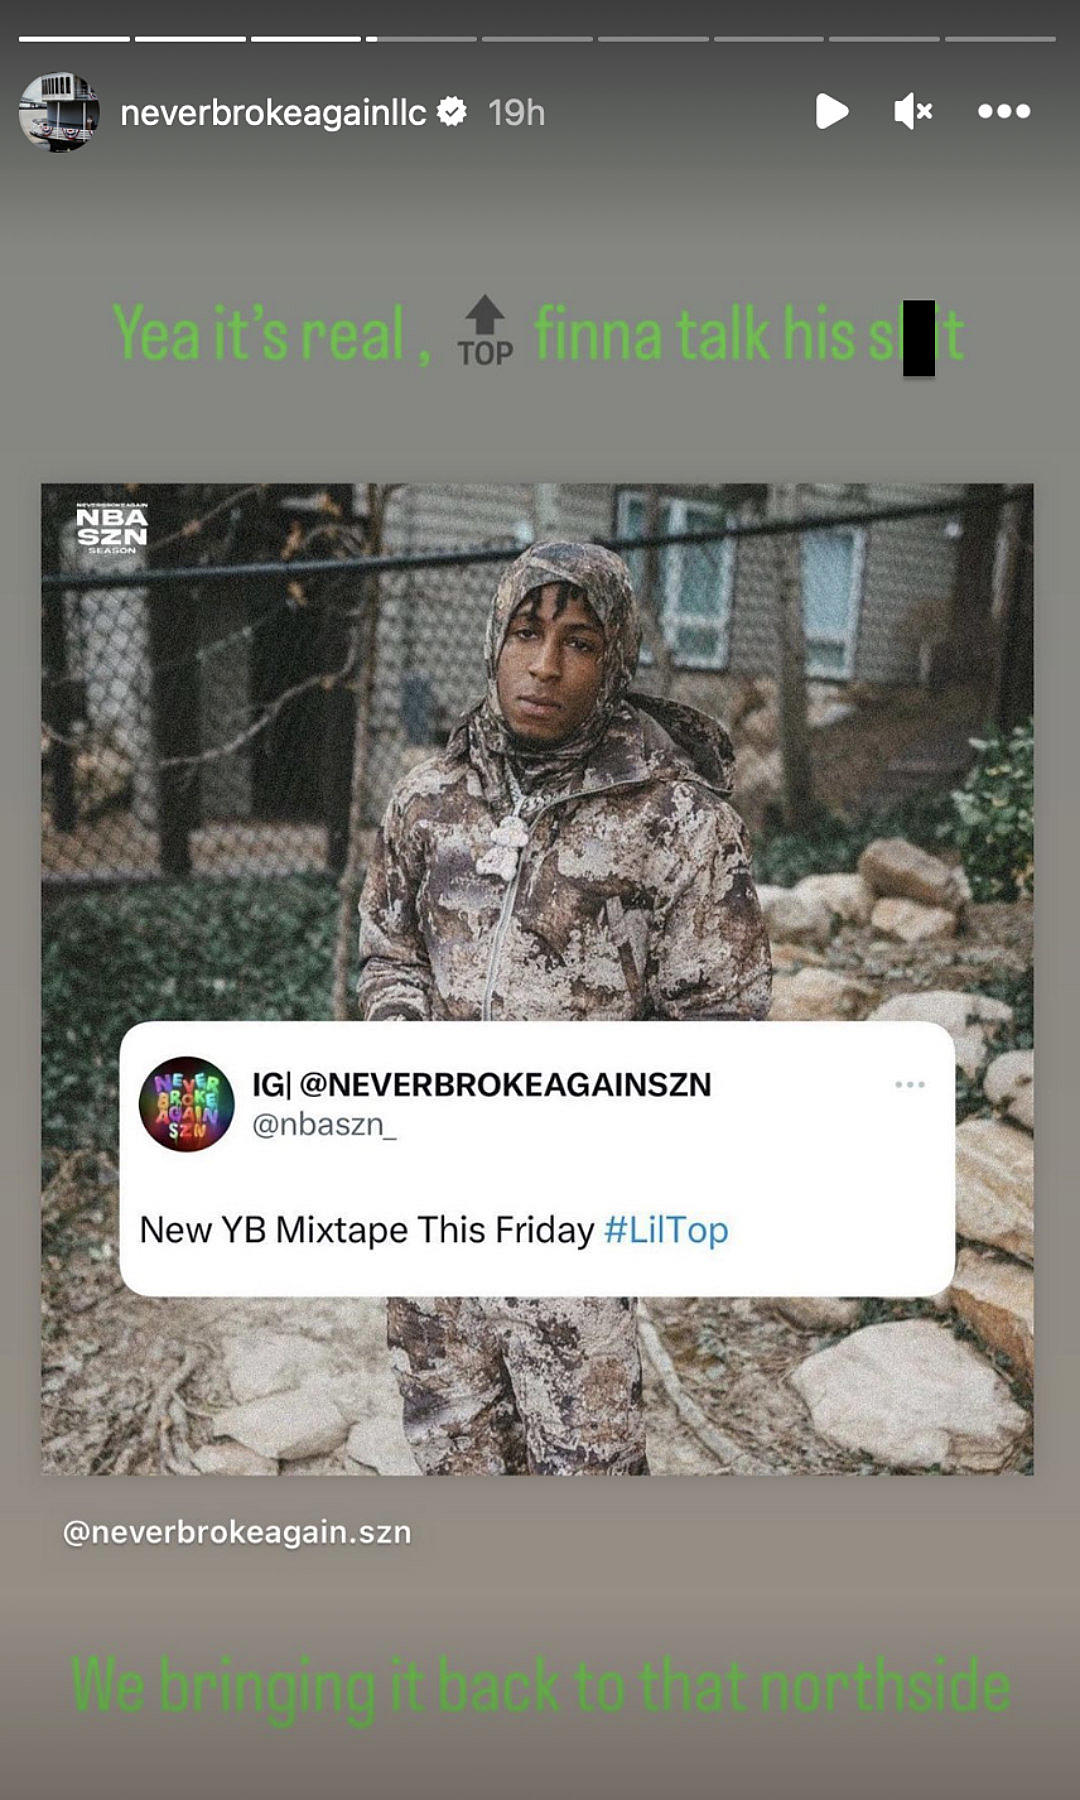 NEW NBA YoungBoy Album “Black” Dropping in January Get Ready